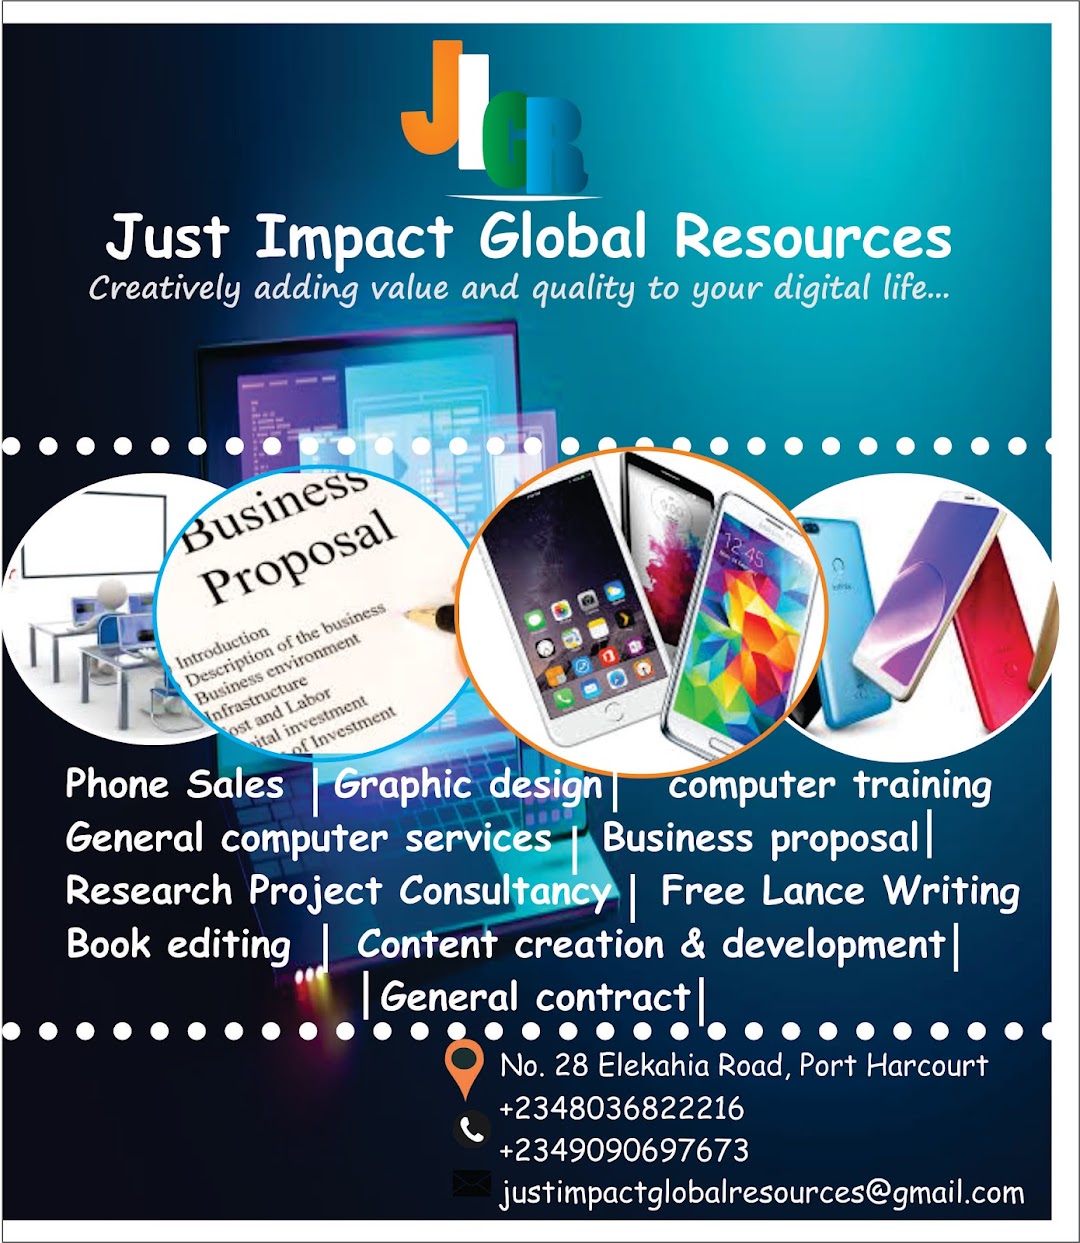 Just Impact Global Resources